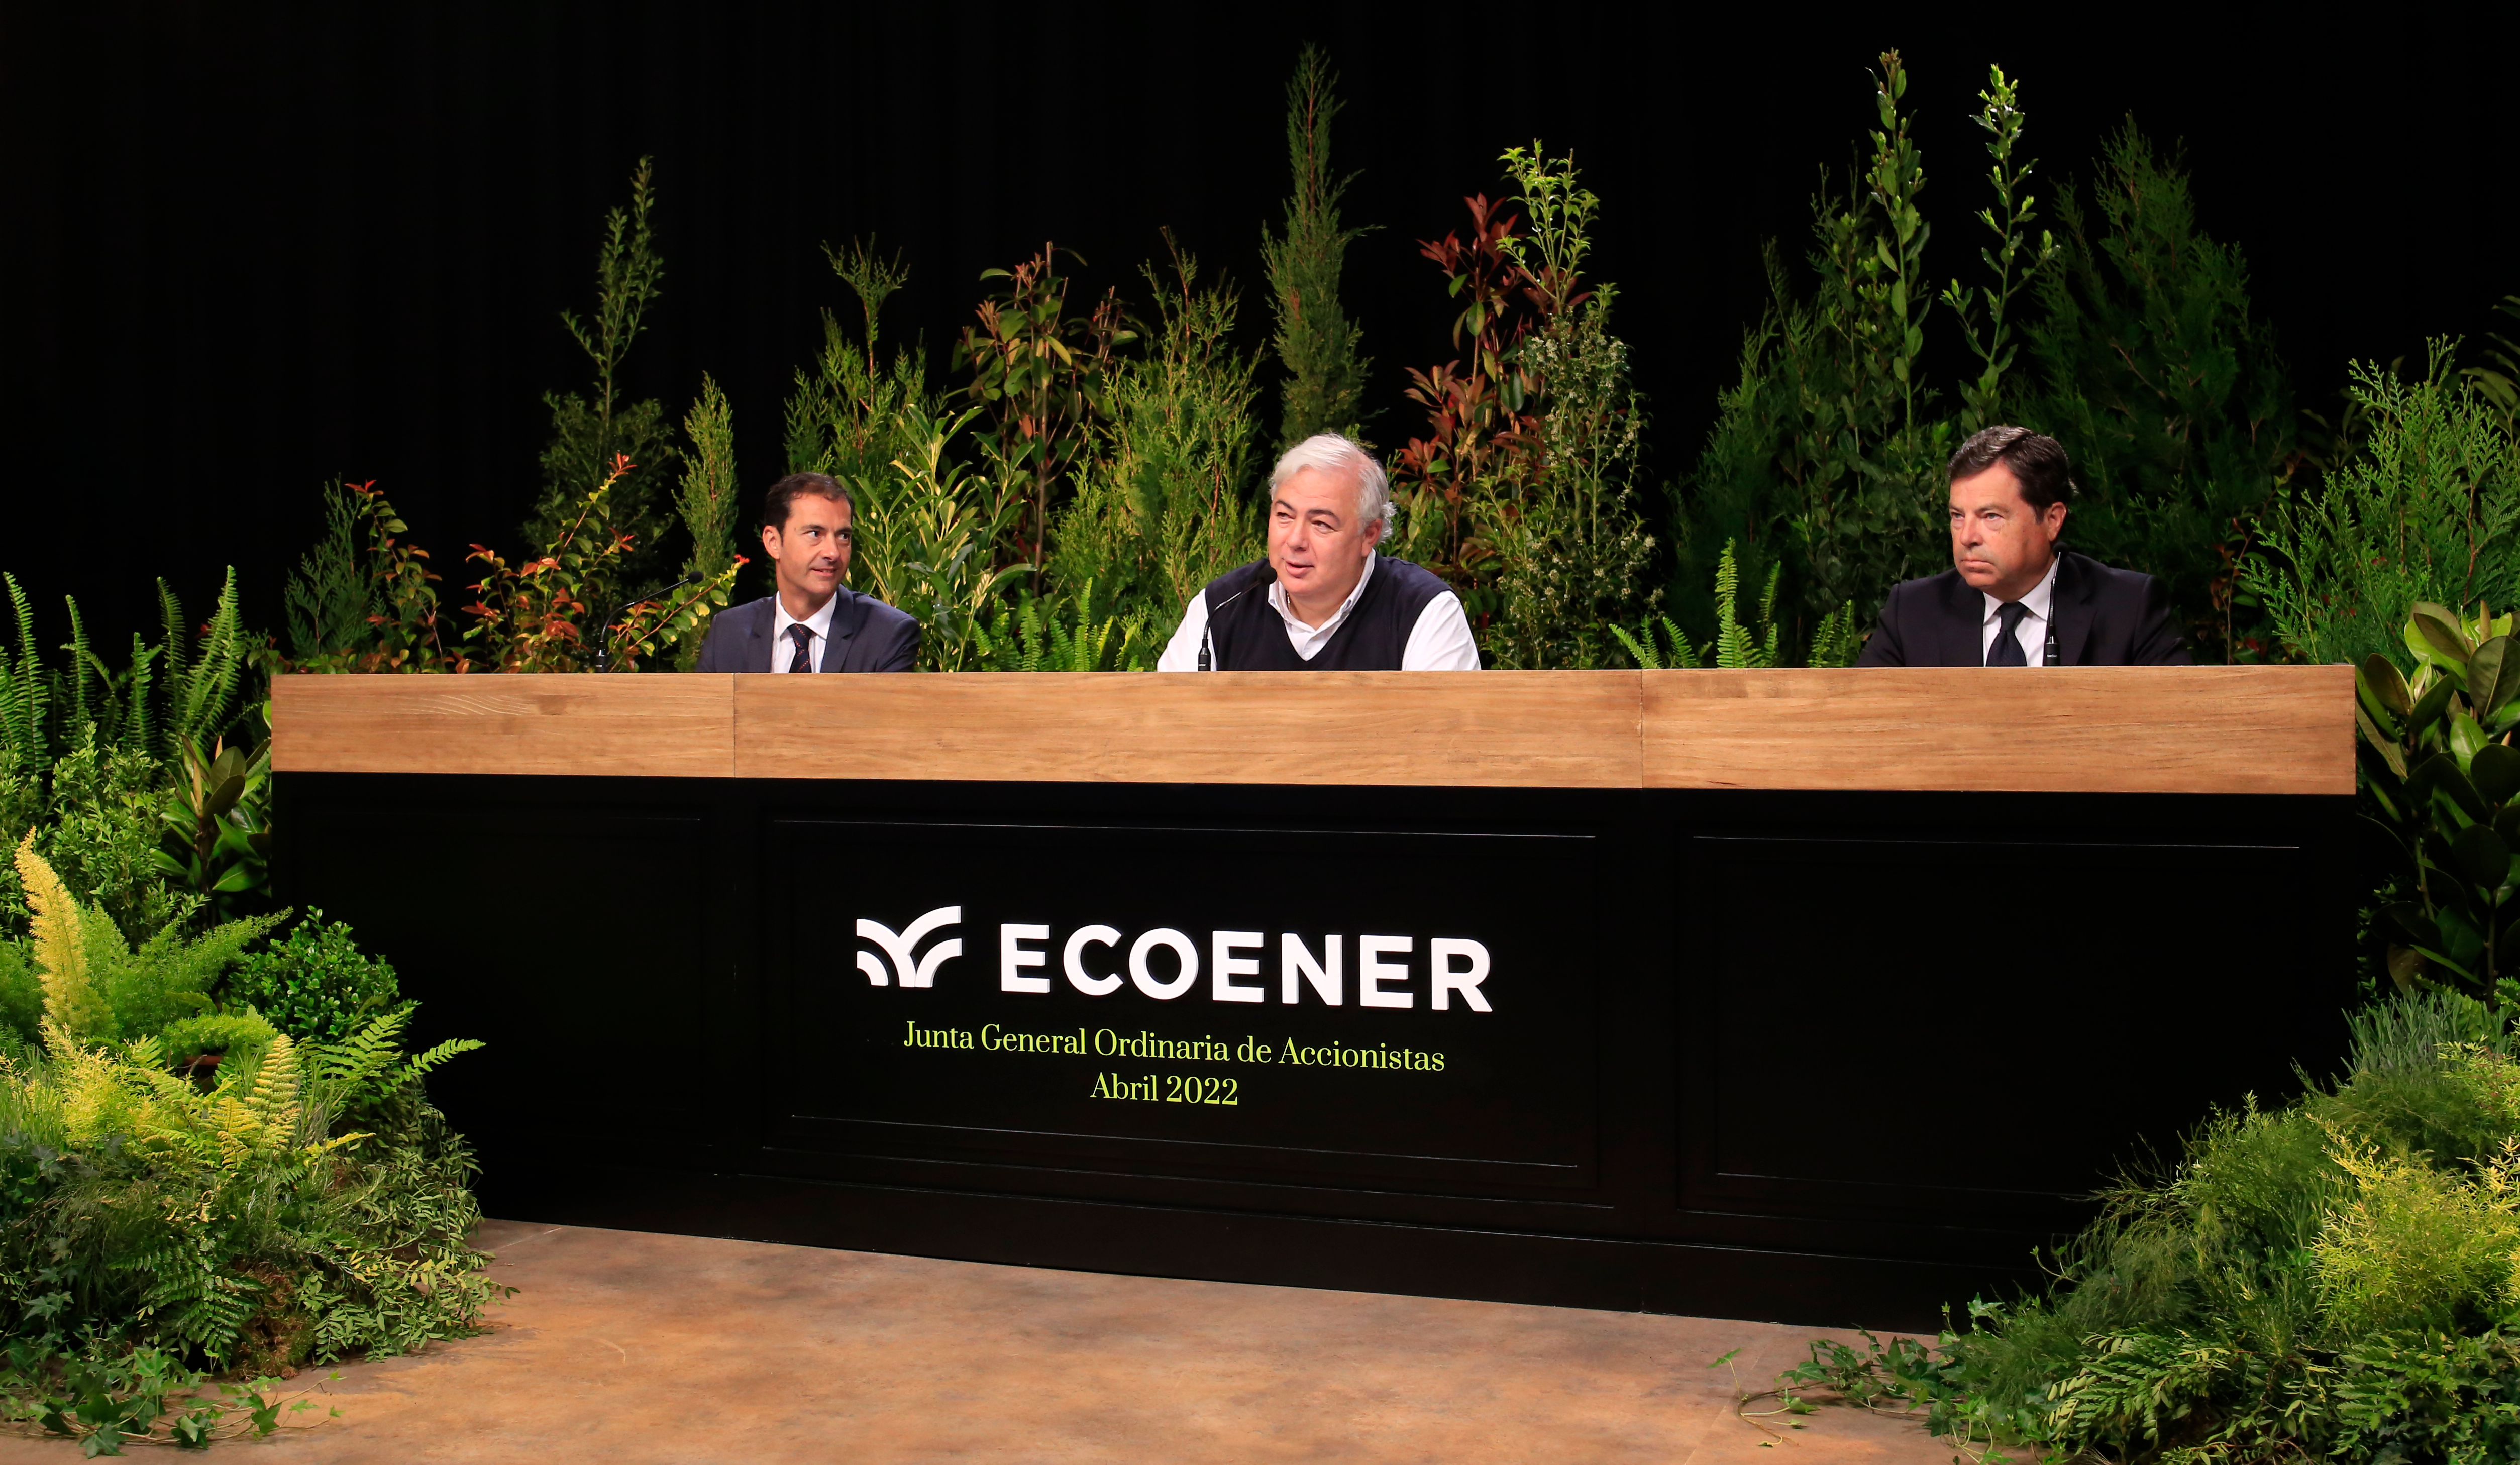 Ecoener Annual General Meeting approves 2021 financial statements